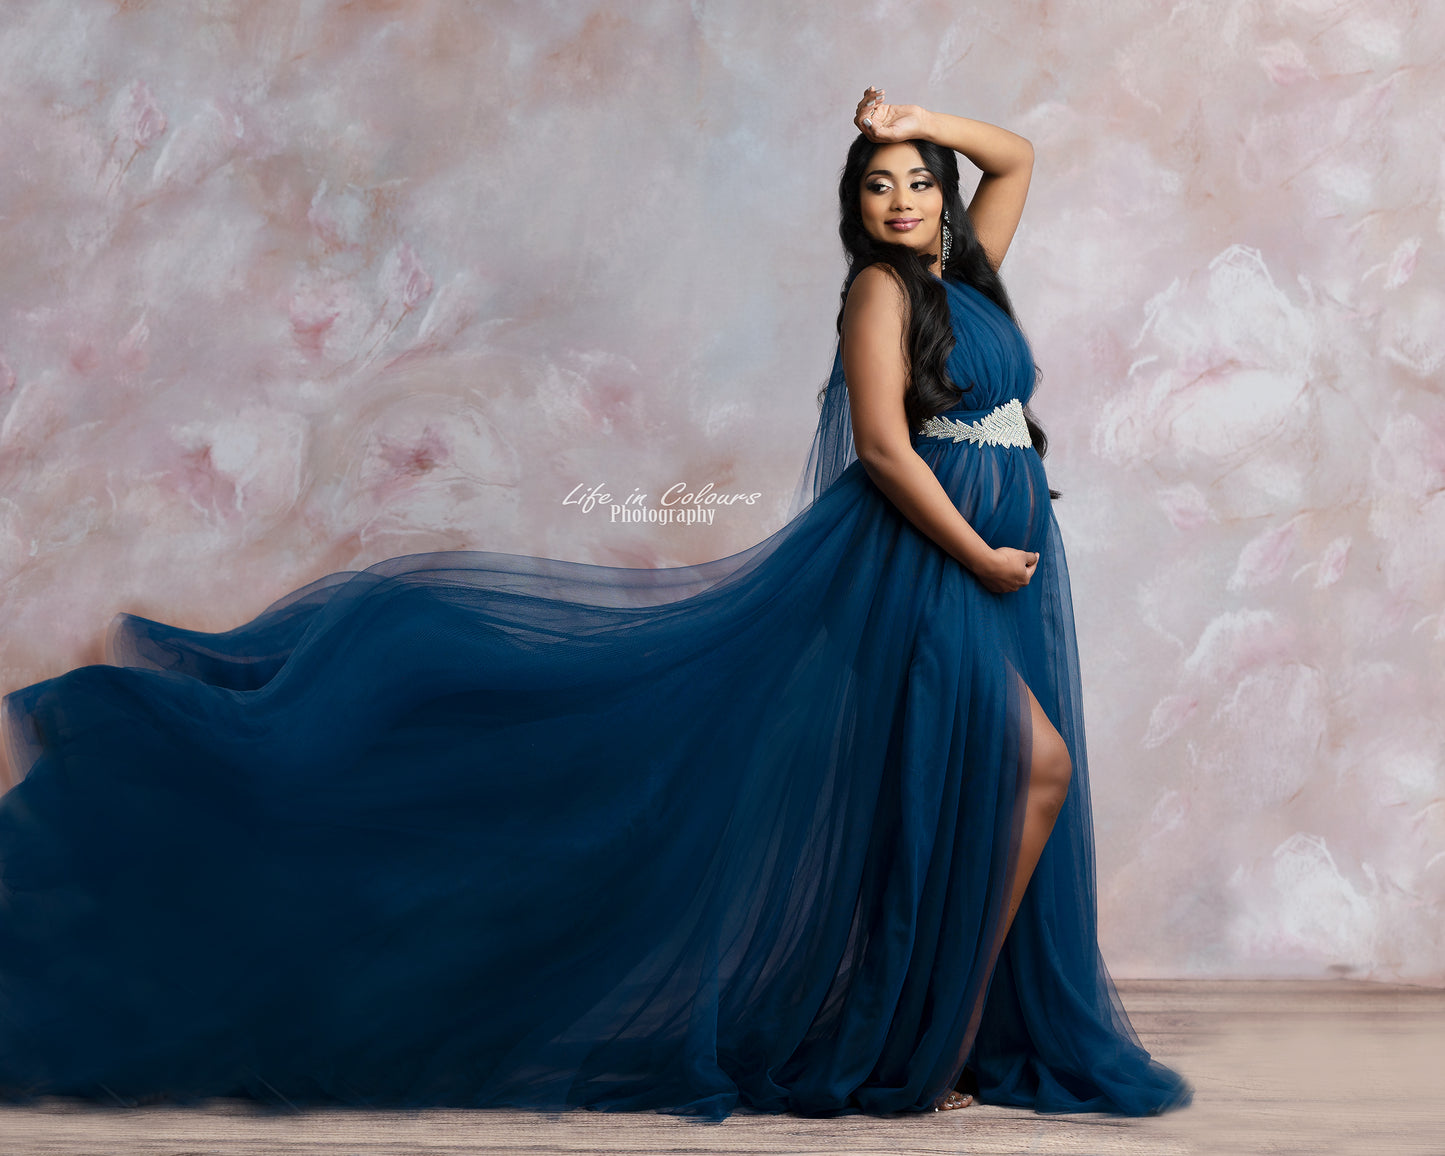 FOR HIRE / RENT tulle Maternity Photoshoot Event Dress " Sapphire" in Navy Blue